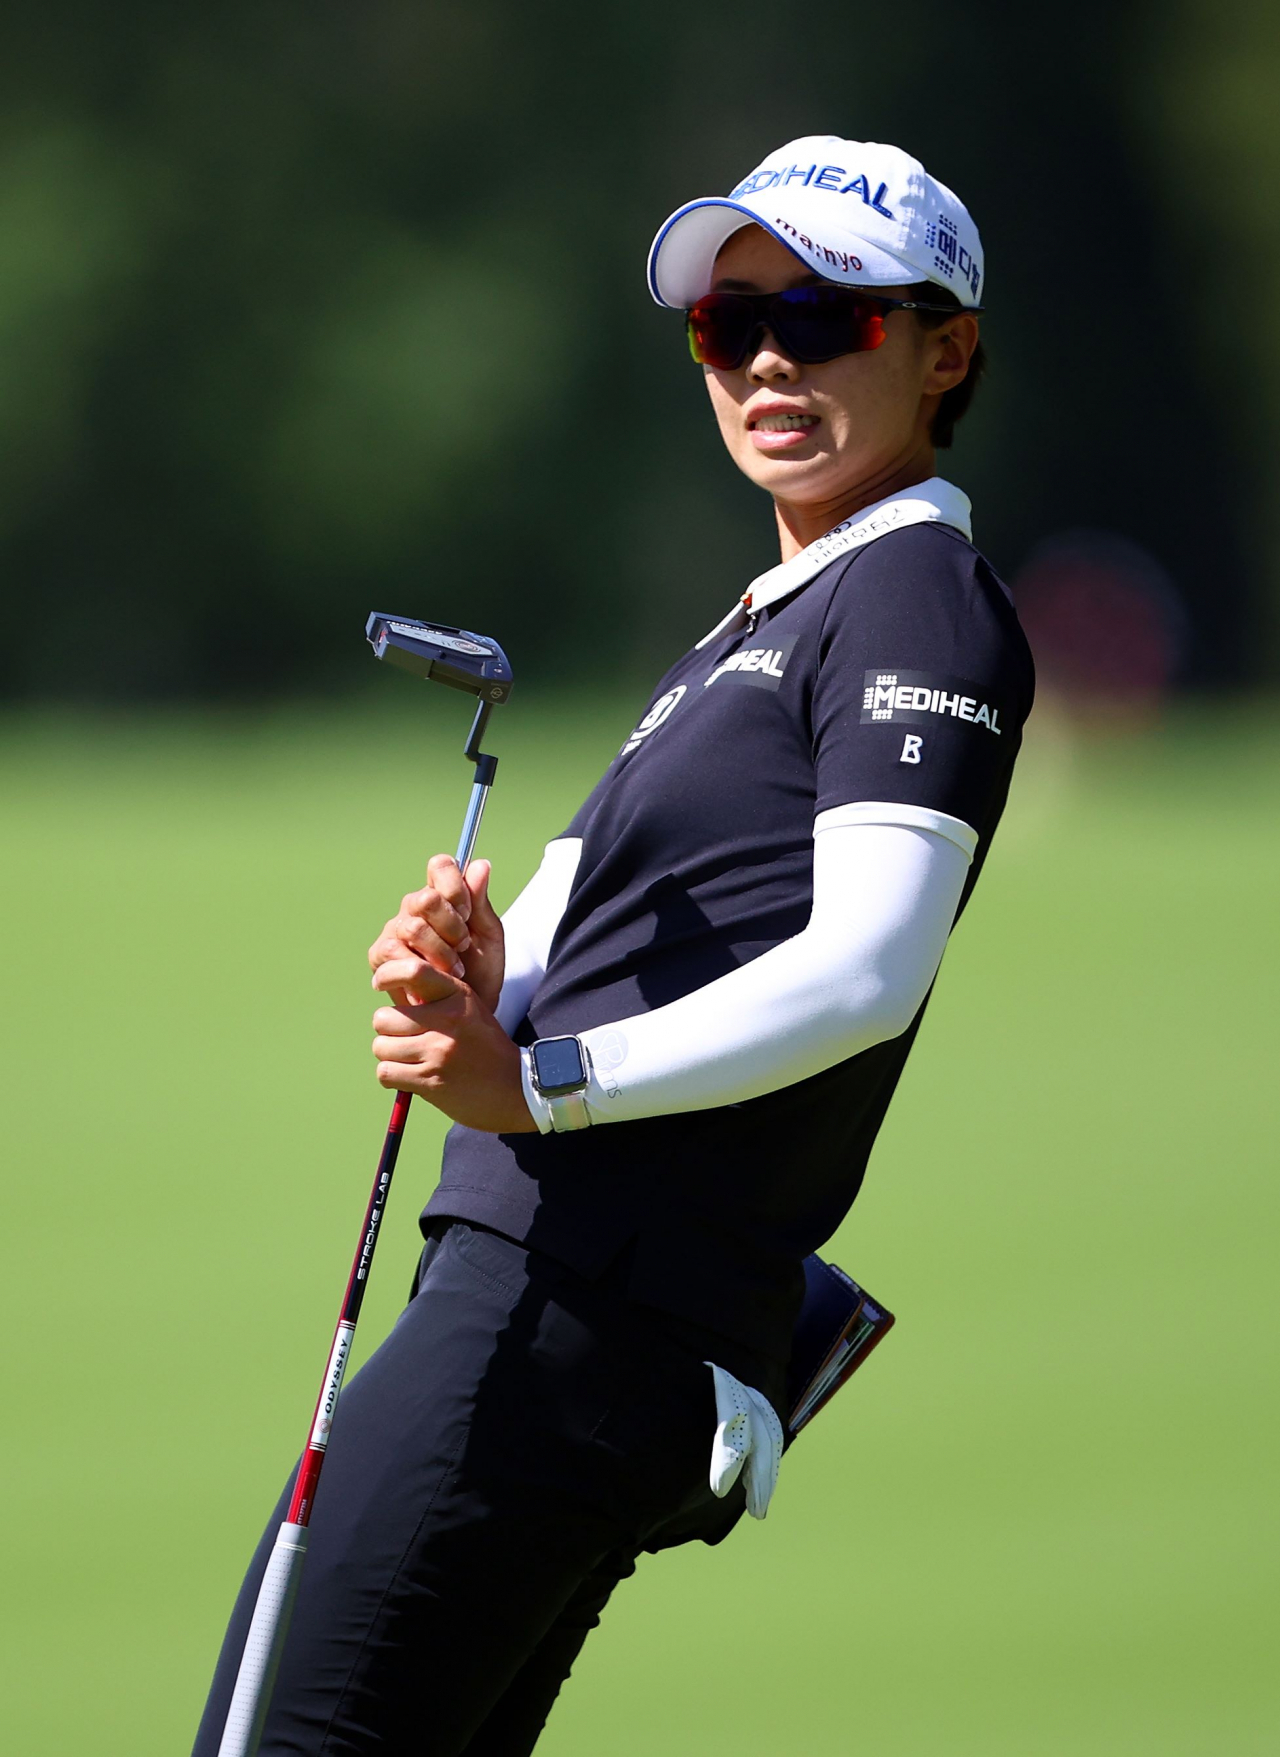 In this Getty Images photo, An Narin of South Korea reacts to a putt on the seventh green during the final round of the CP Women's Open at Ottawa Hunt and Golf Club in Ottawa on Sunday. (Getty Images)